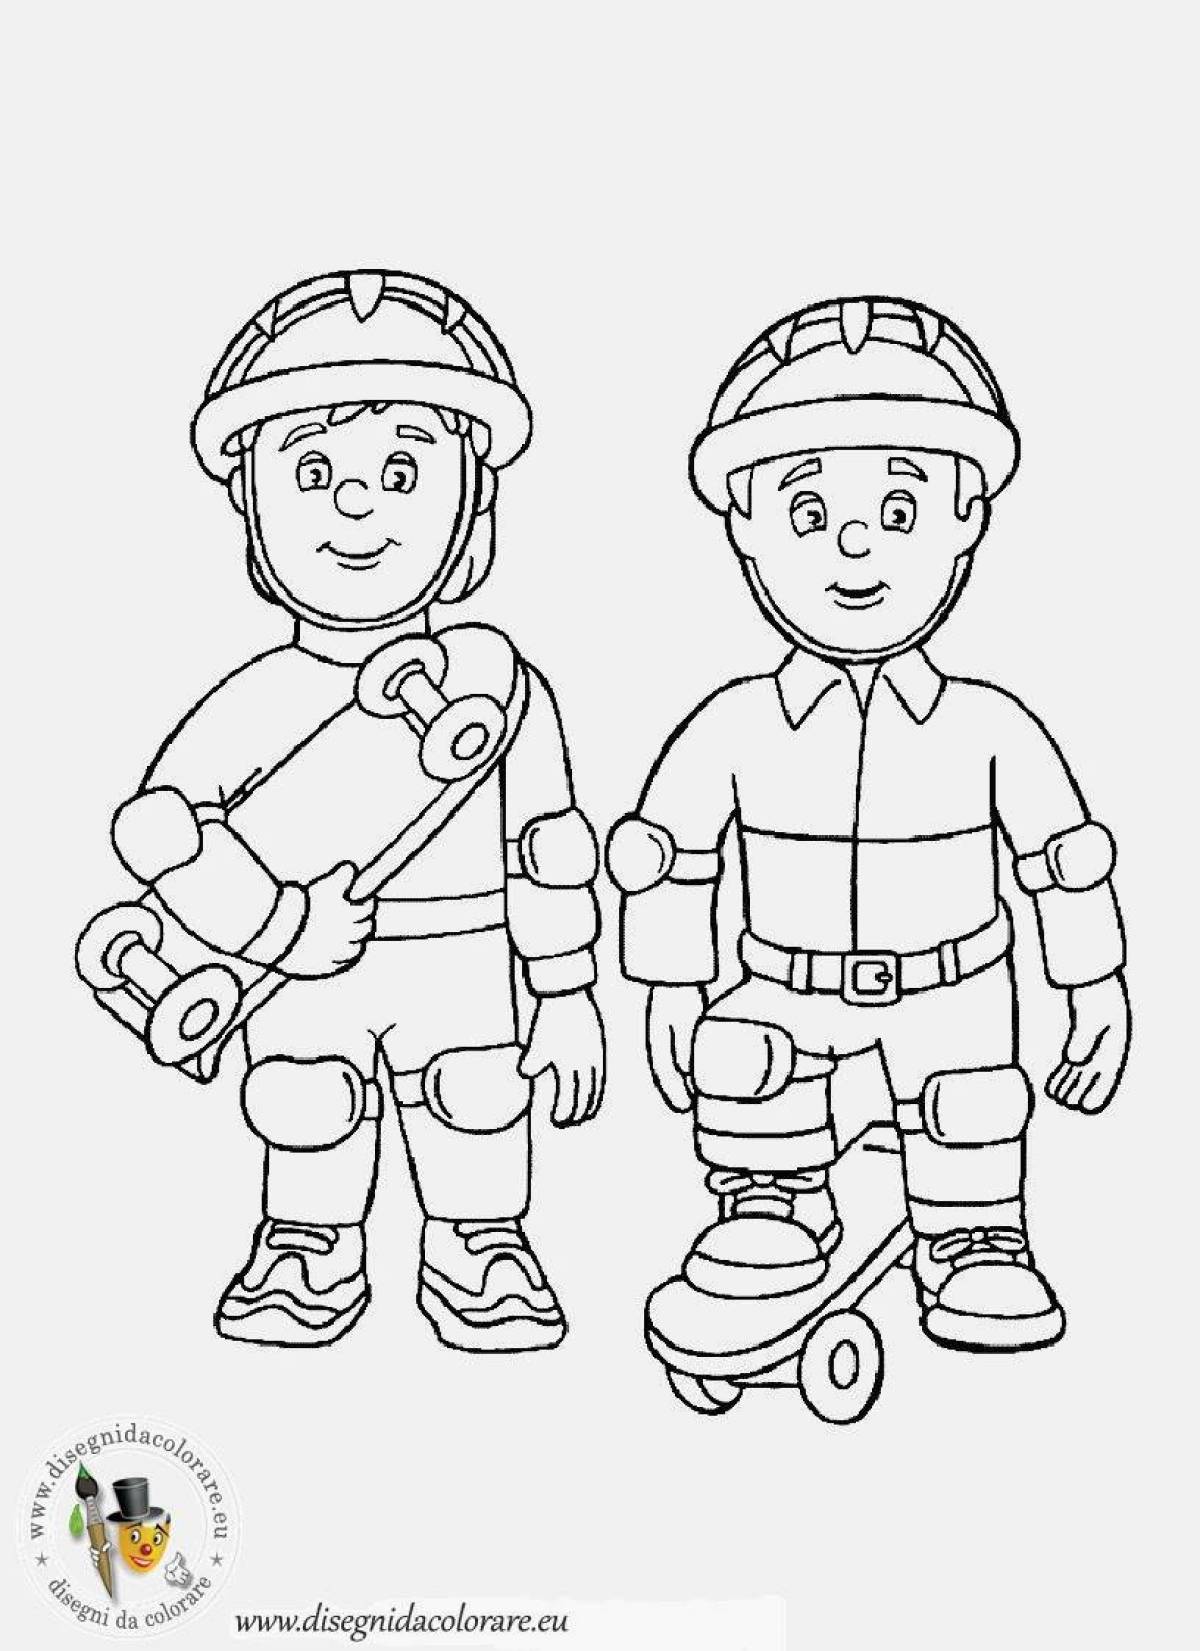 Wonderful firefighter coloring for kids